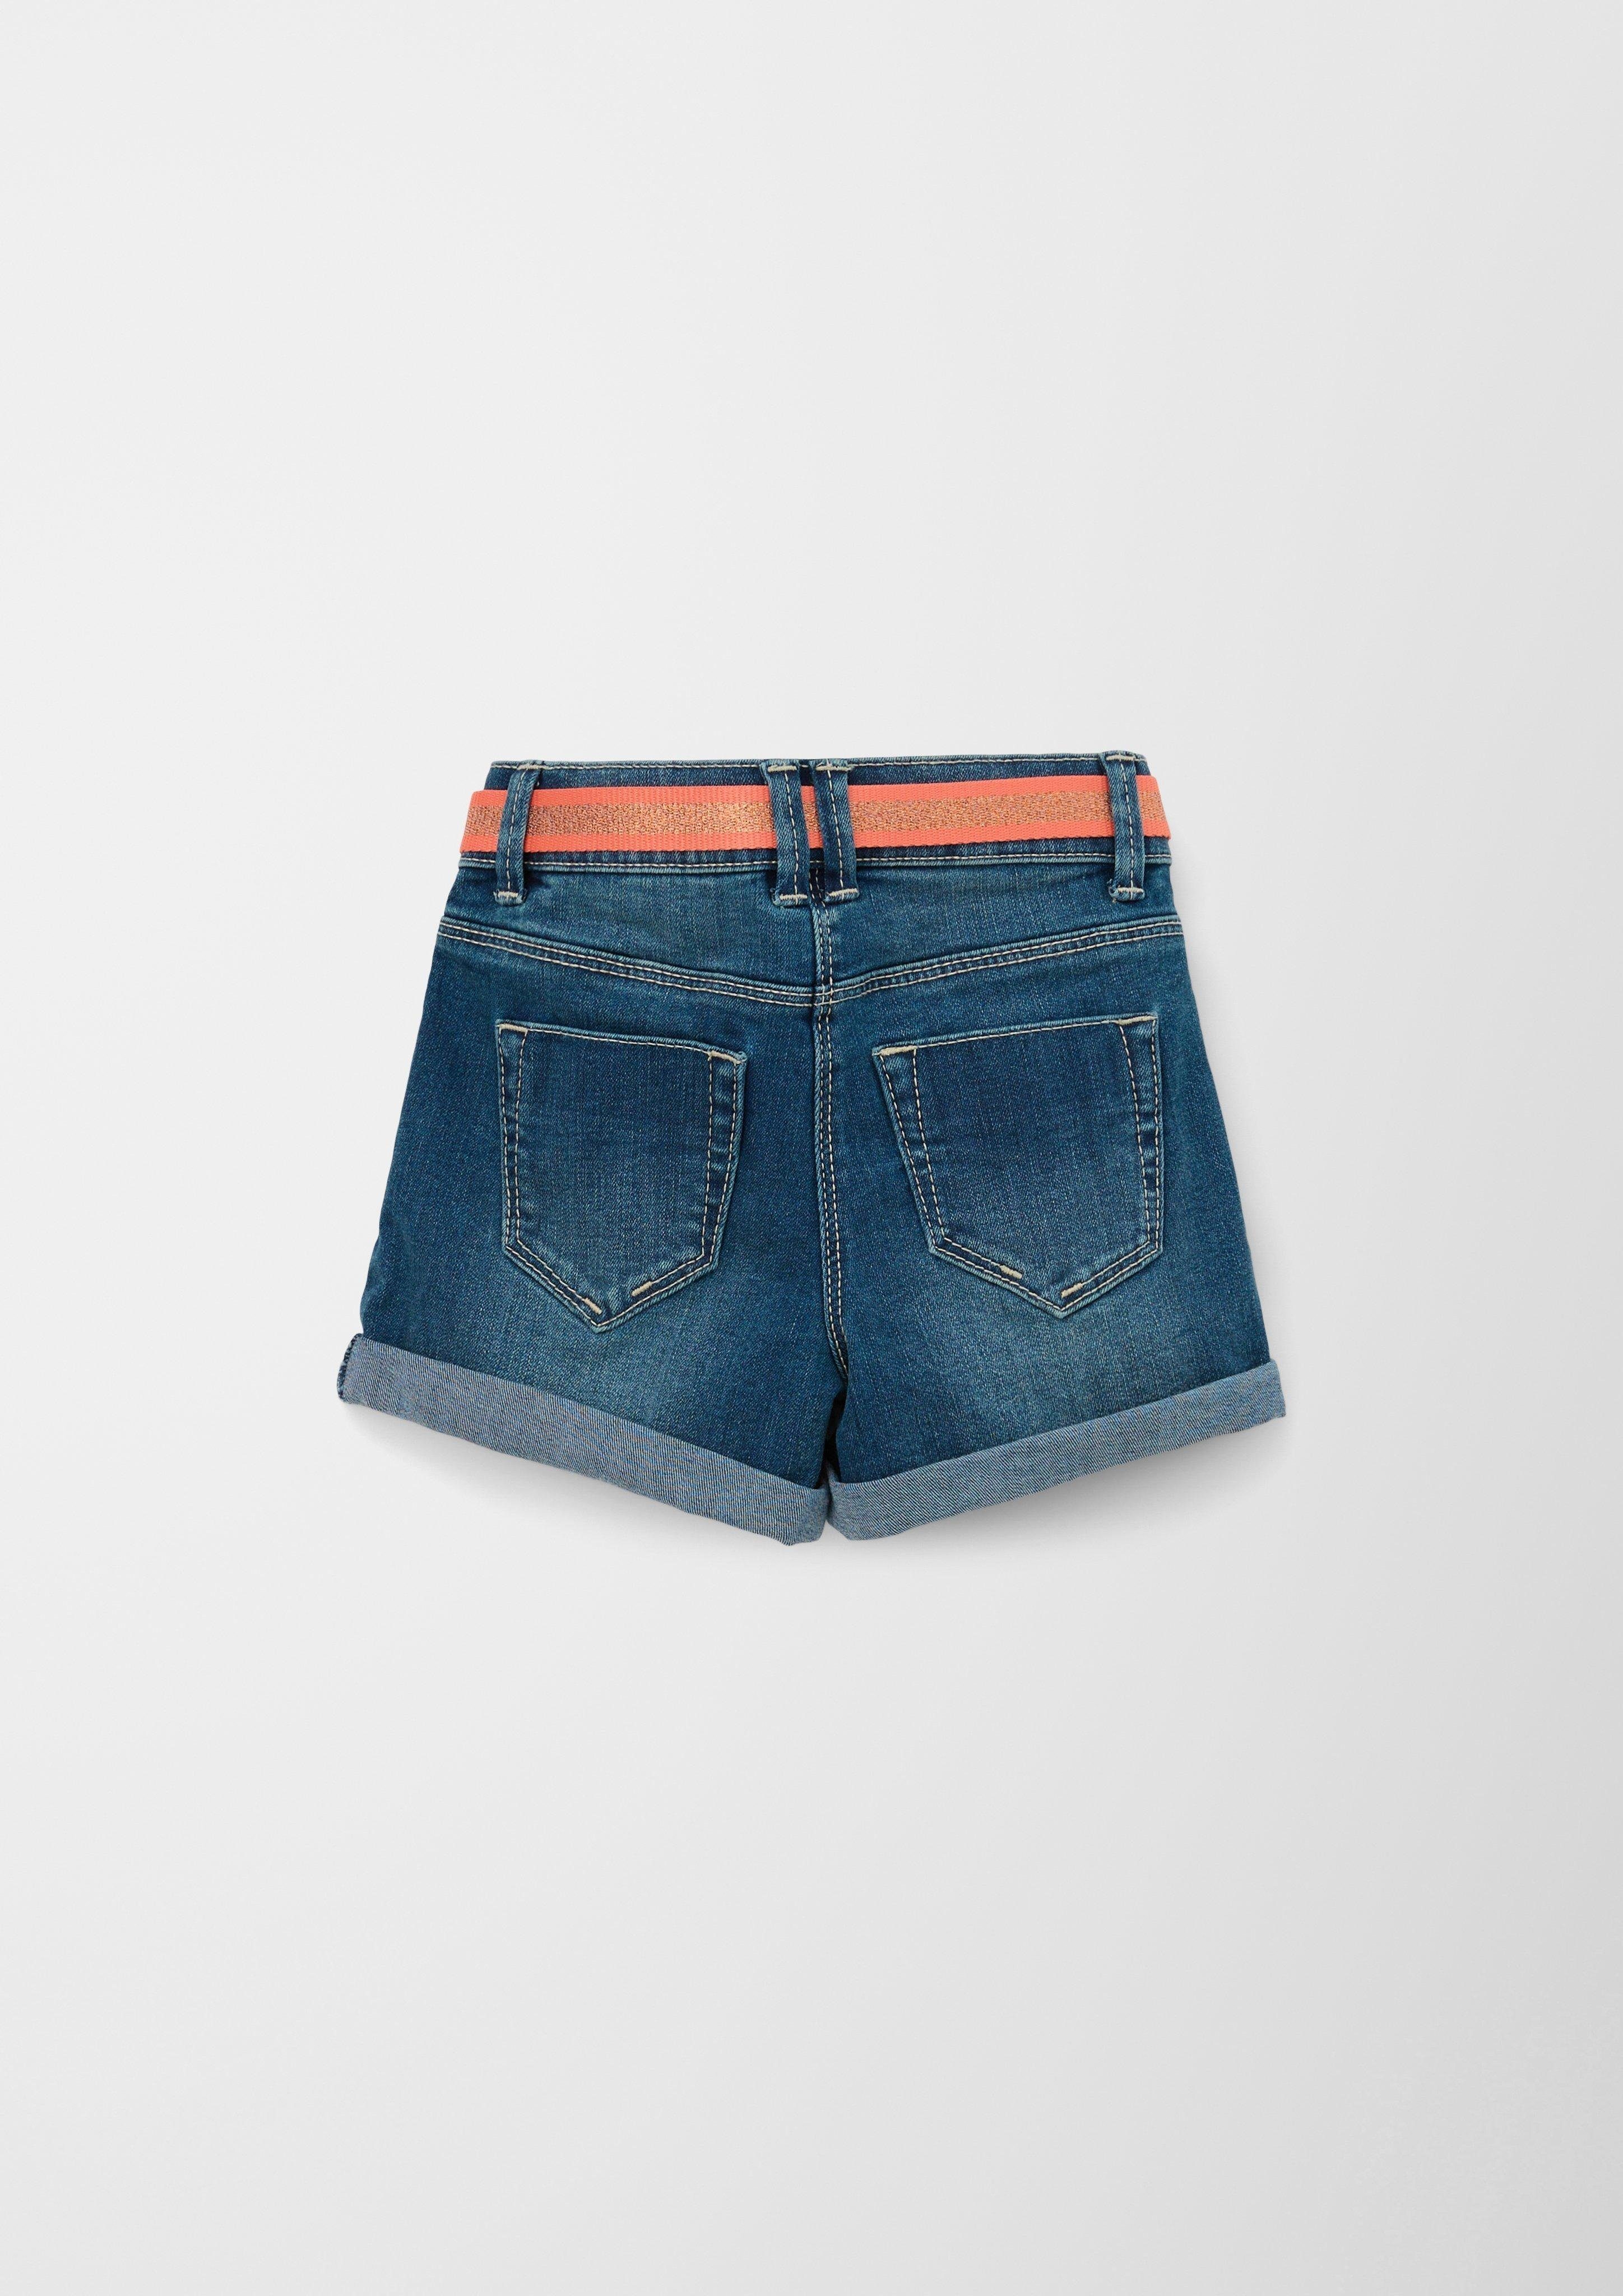 Jeansshorts Loose / s.Oliver / Rise Jeans-Shorts High / Waschung Fit Leg Wide